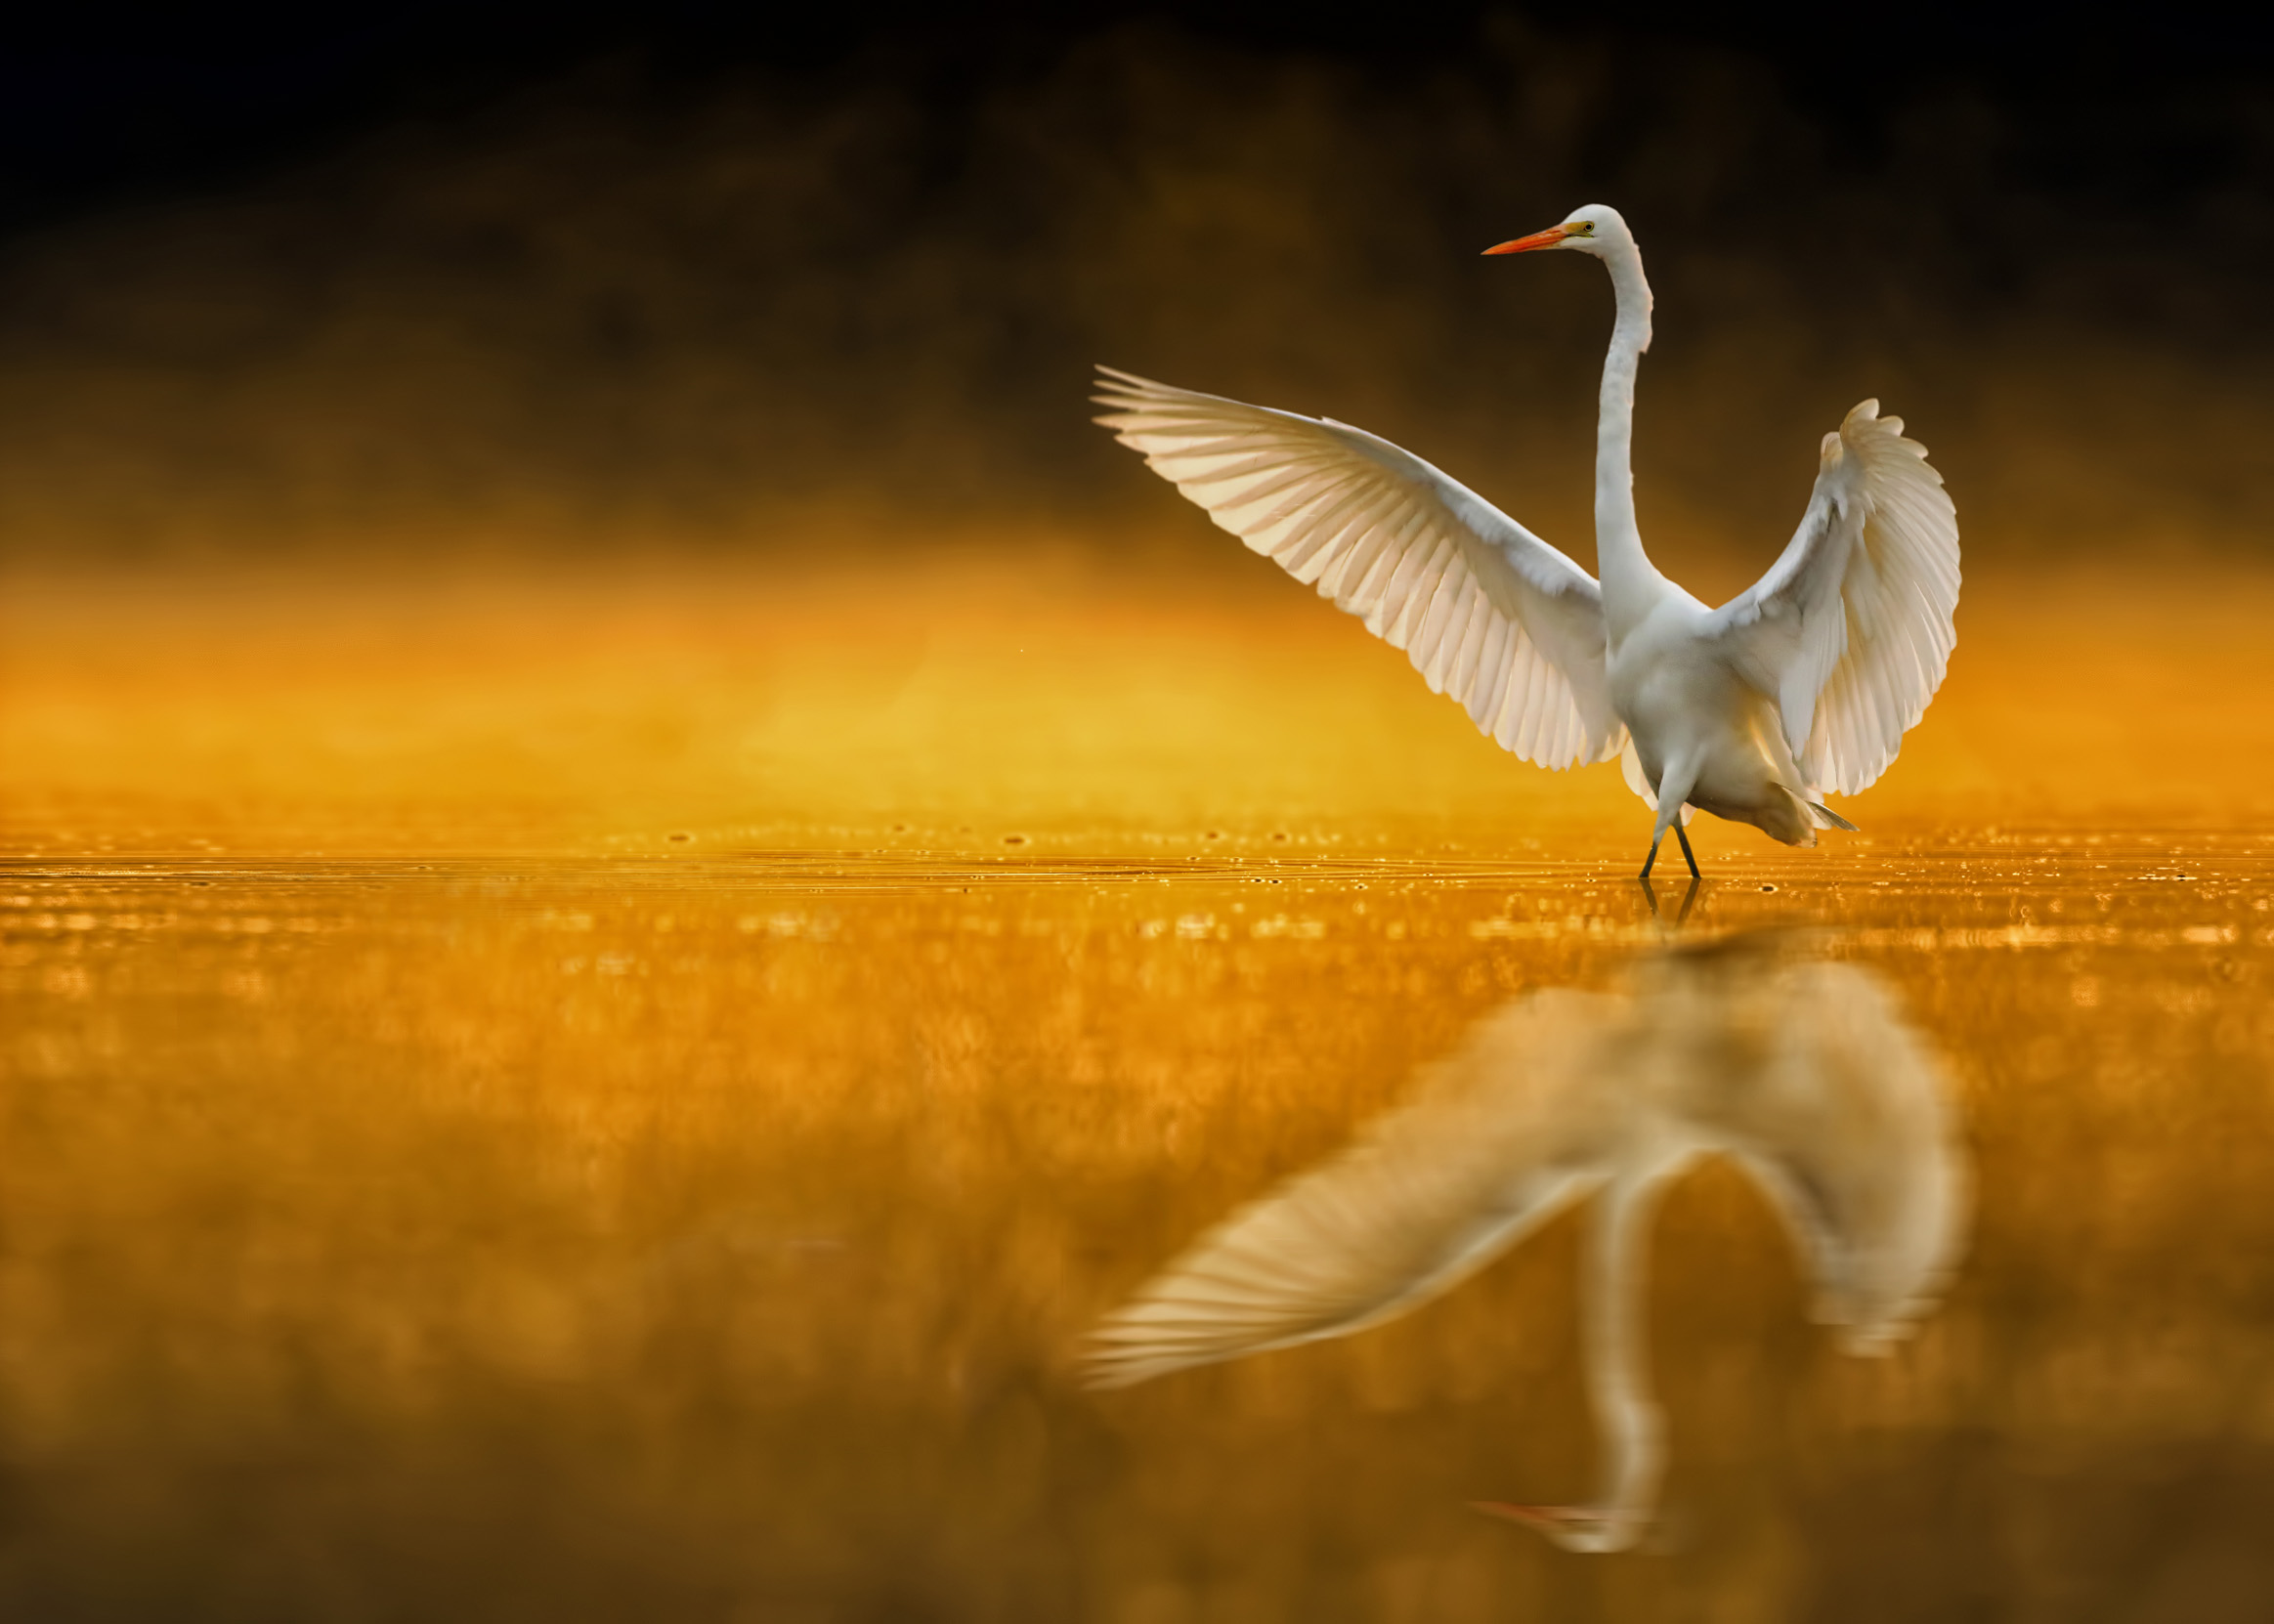 A Great White Egret with it's wings open dancing in shallow waters at sunrise.